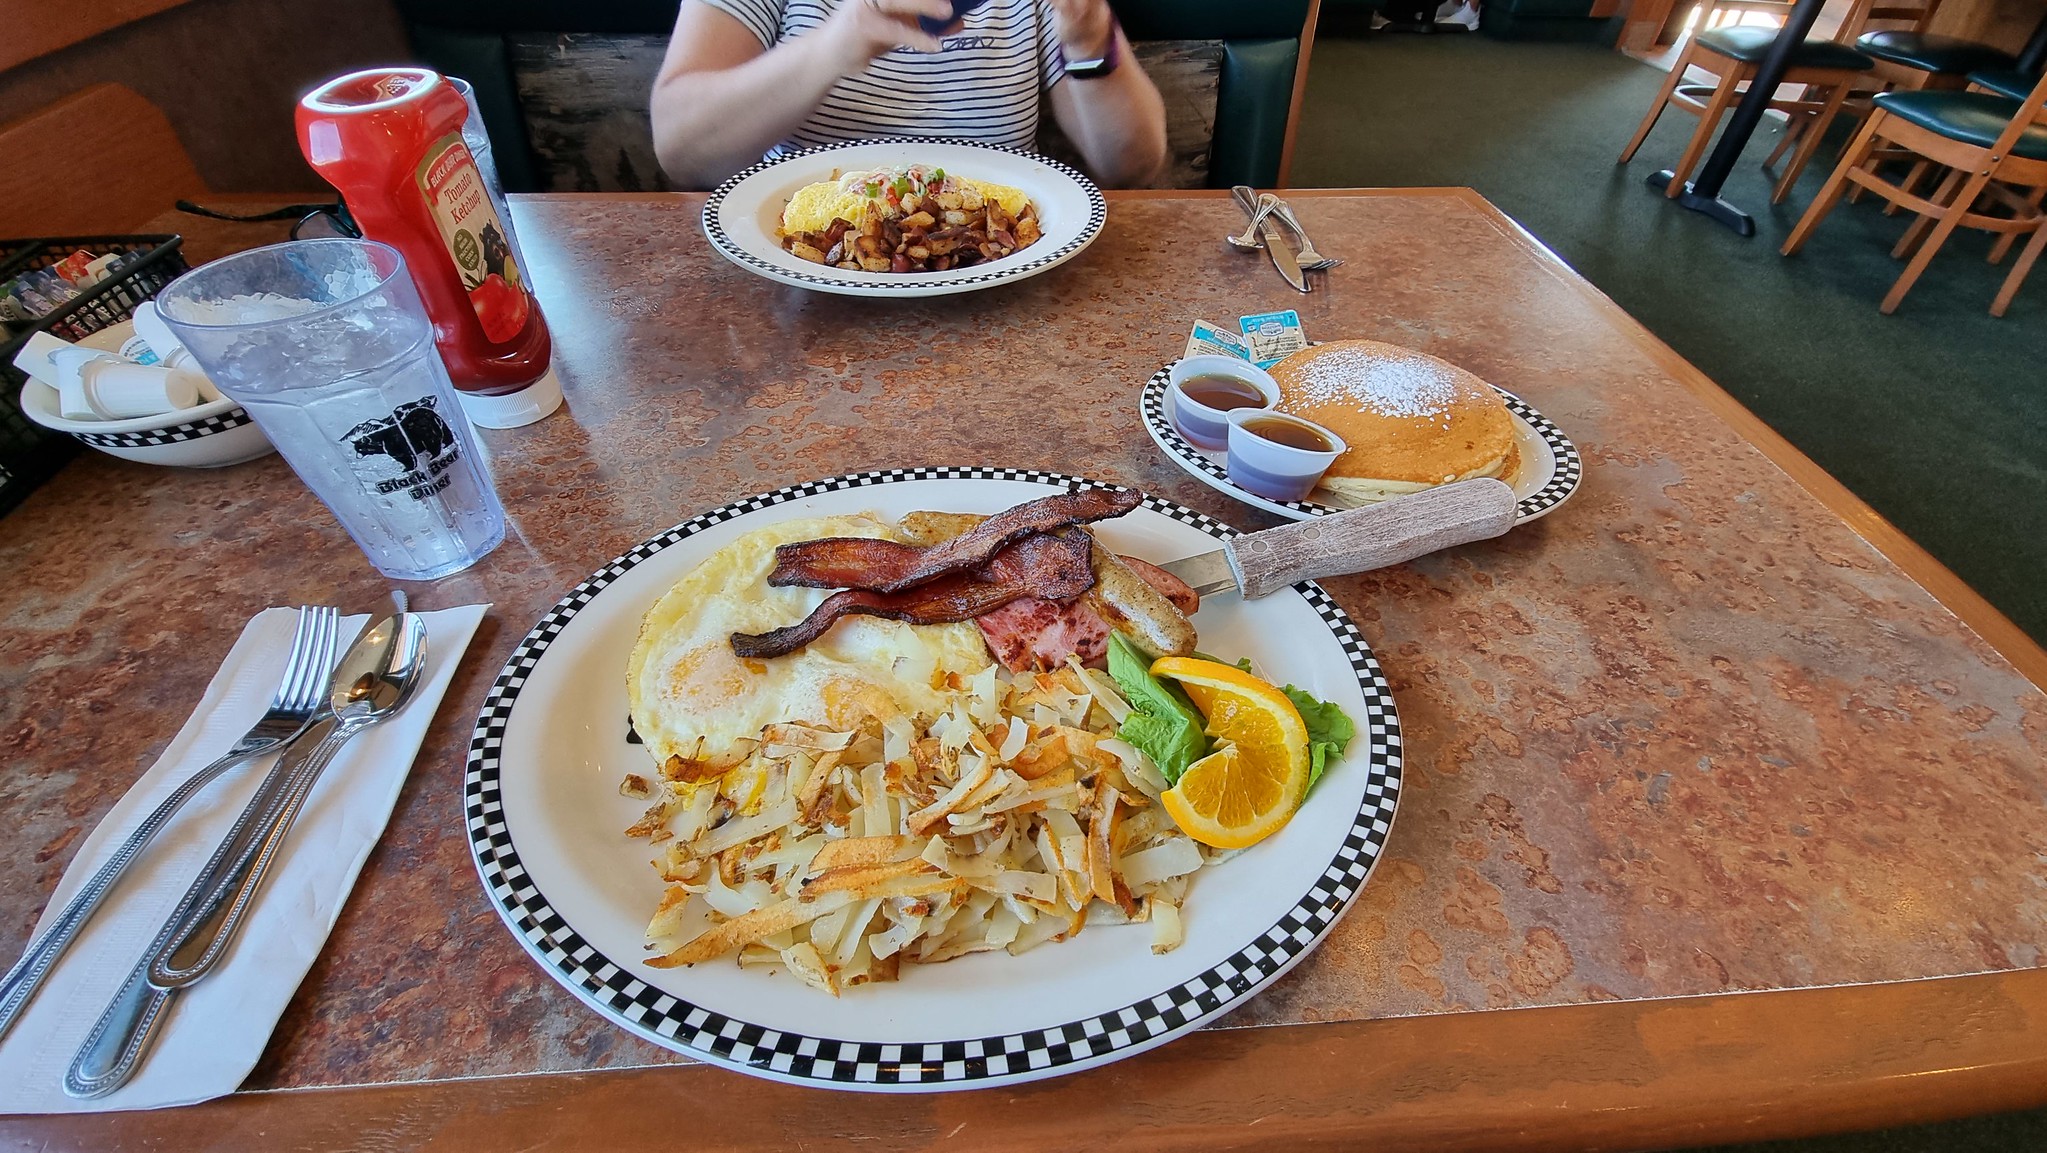 Brunch enjoyed at the Black Bear Diner in Twin Falls